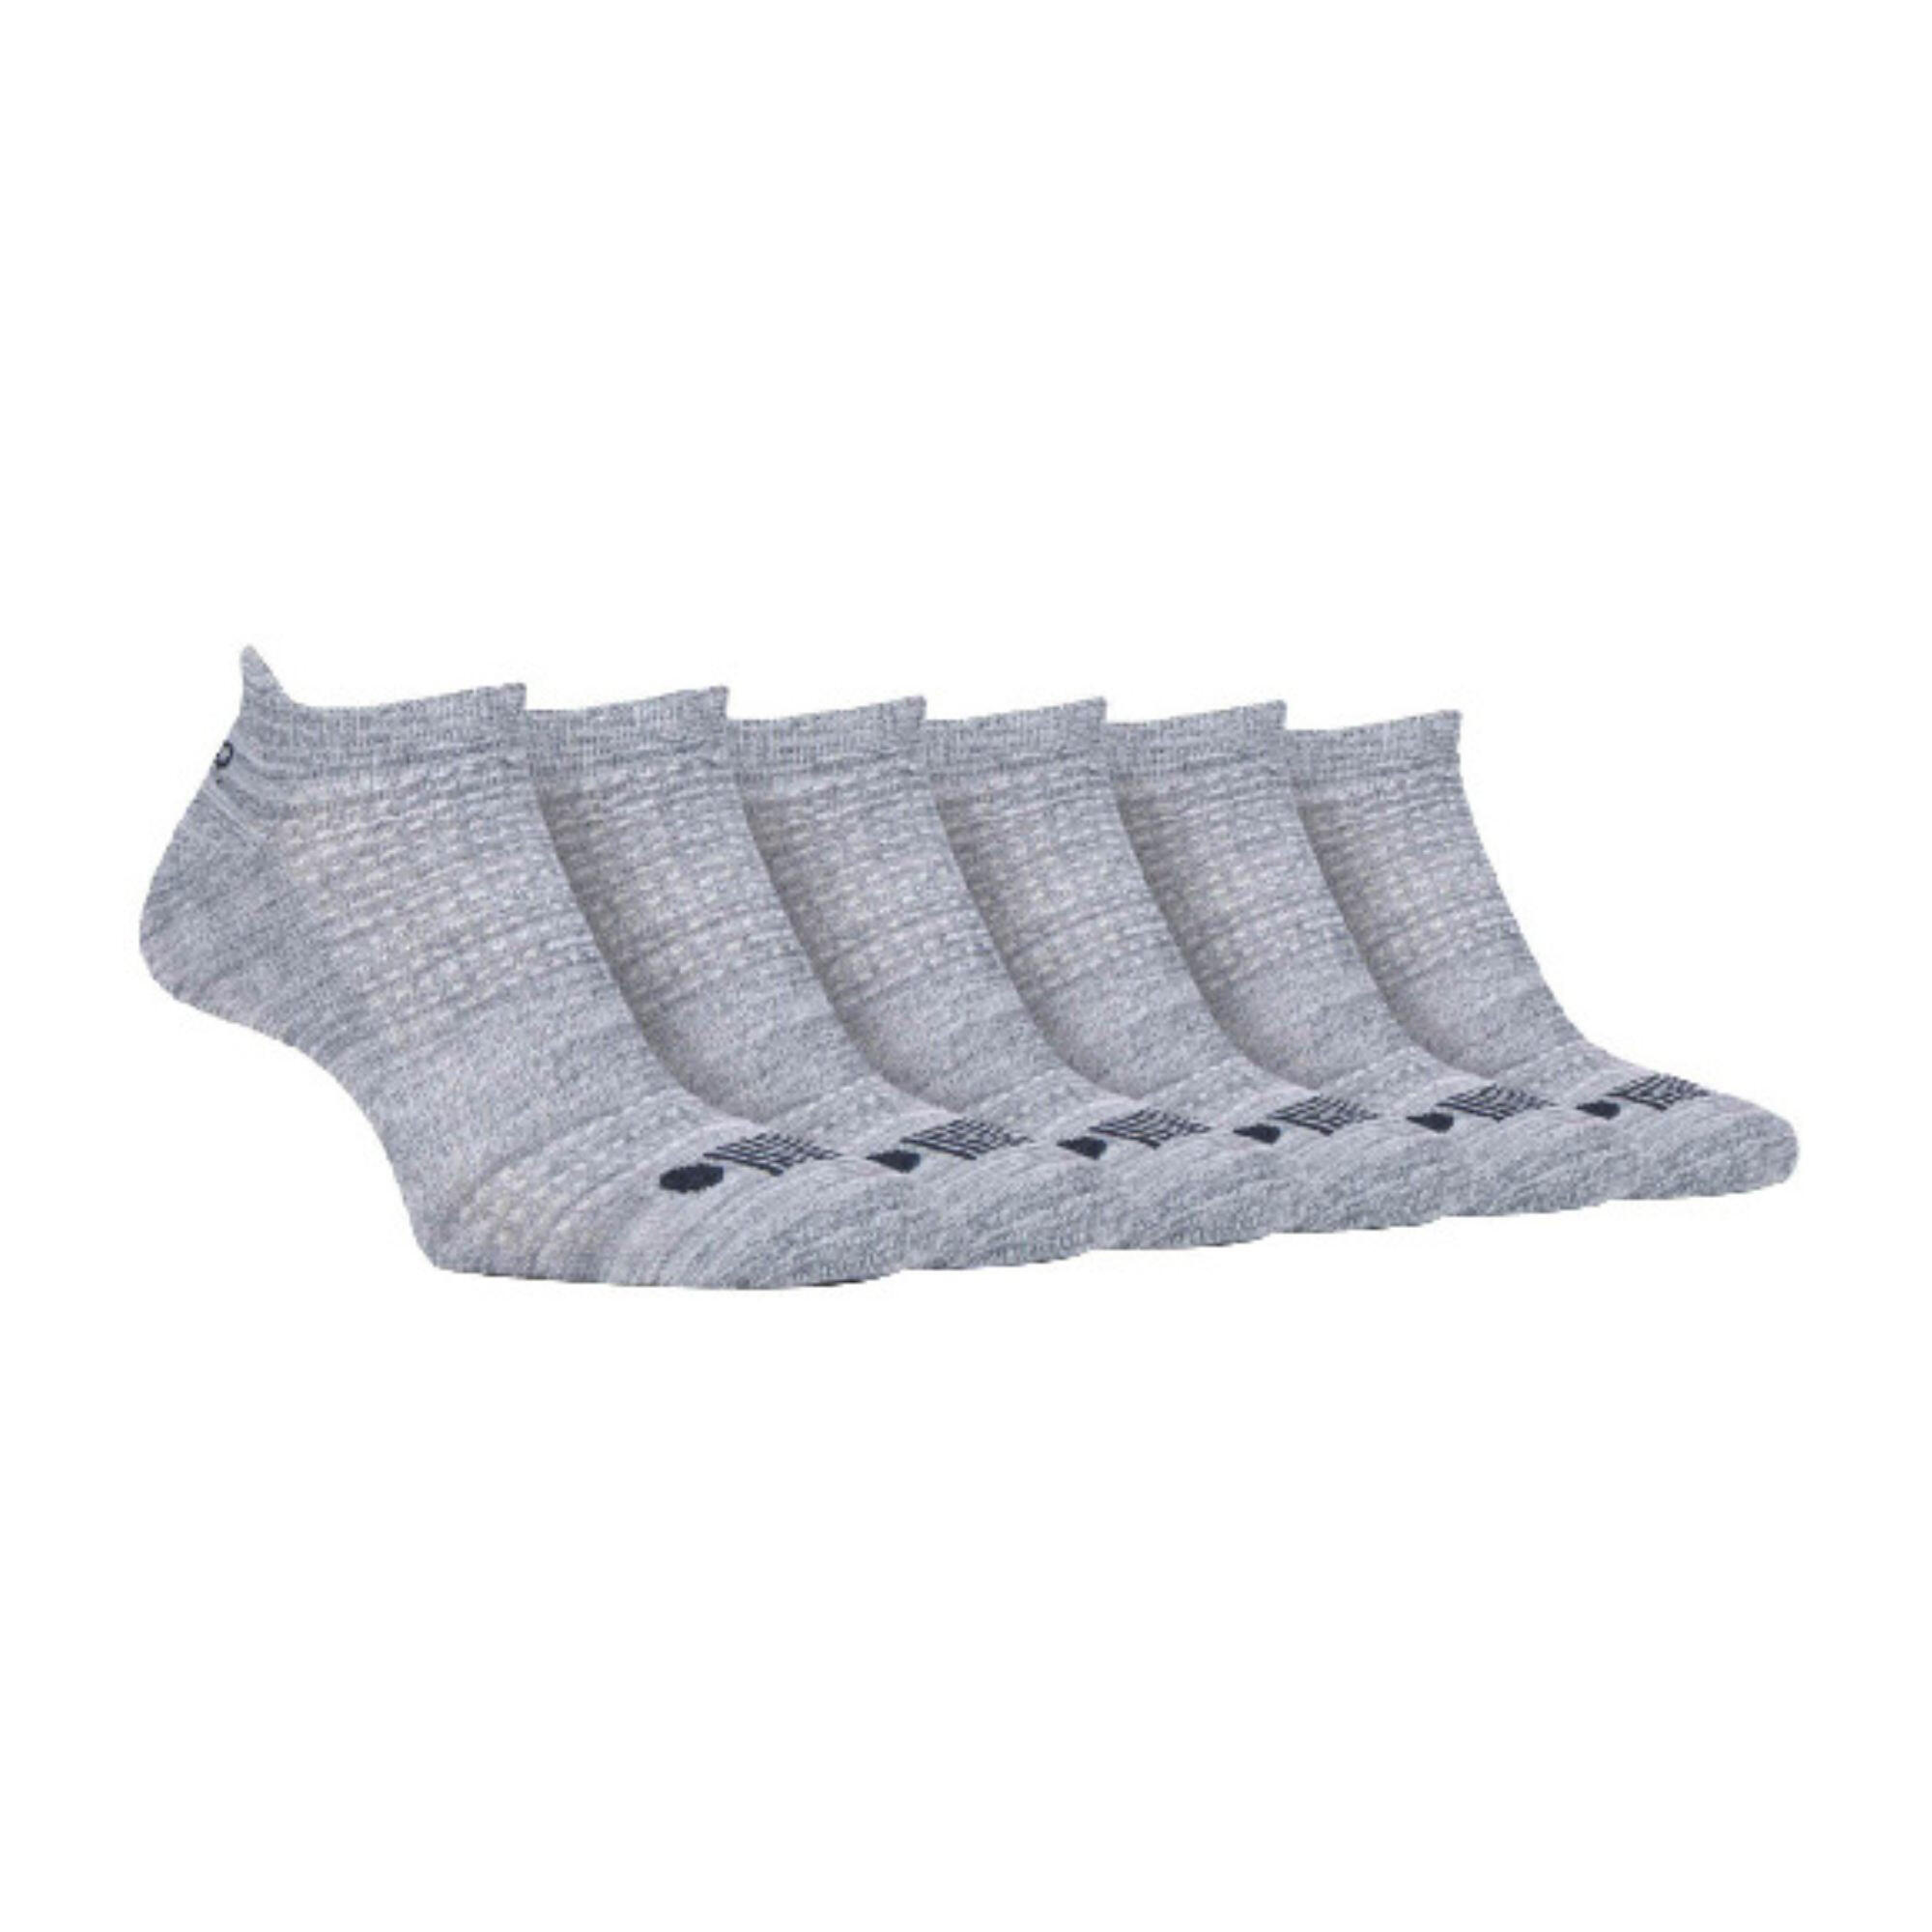 6 Pairs Mens Cotton Cushioned Sport Ankle Trainer Socks For Running 1/2